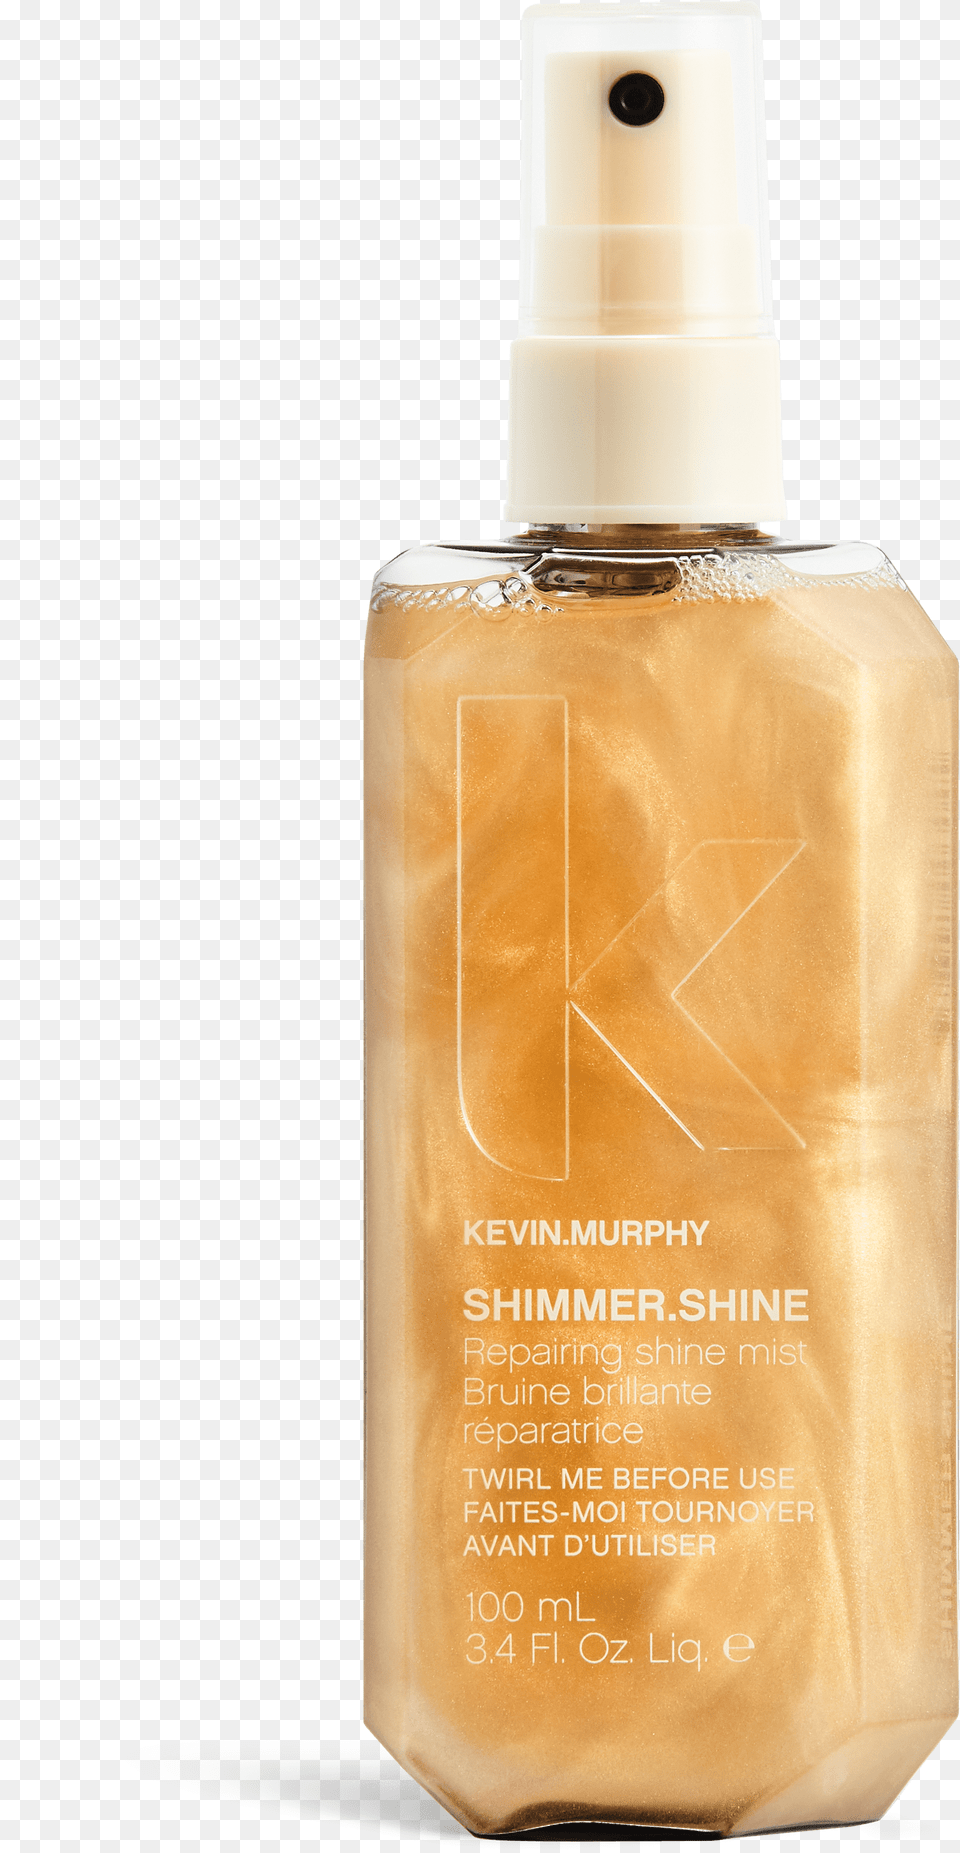 Kevin Murphy Shimmer Shine Kaina, Bottle, Cosmetics, Perfume, Lotion Free Png Download